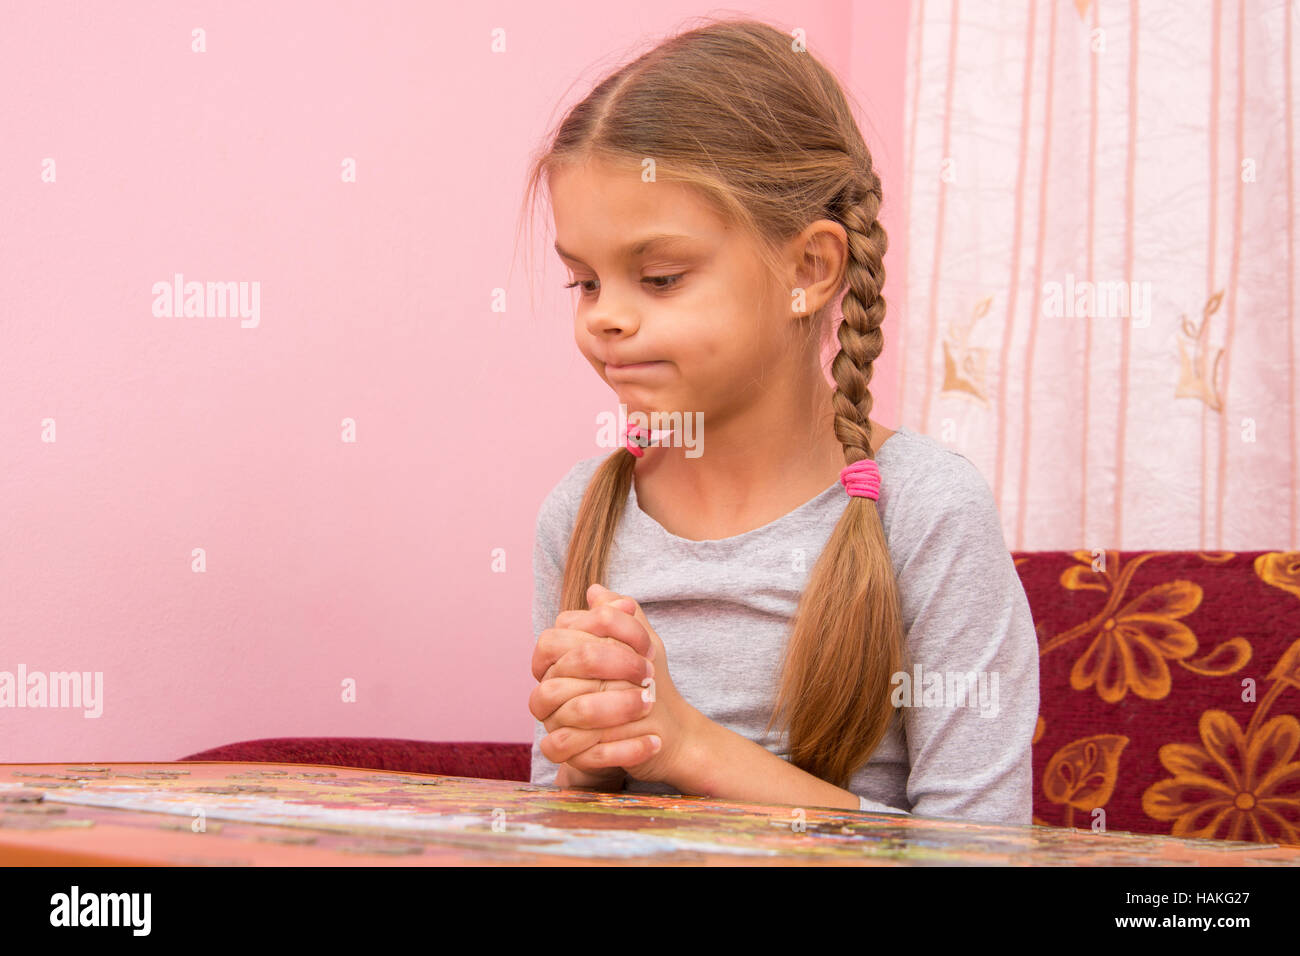 Girl funny thought pouting cheeks collecting picture of puzzles Stock Photo